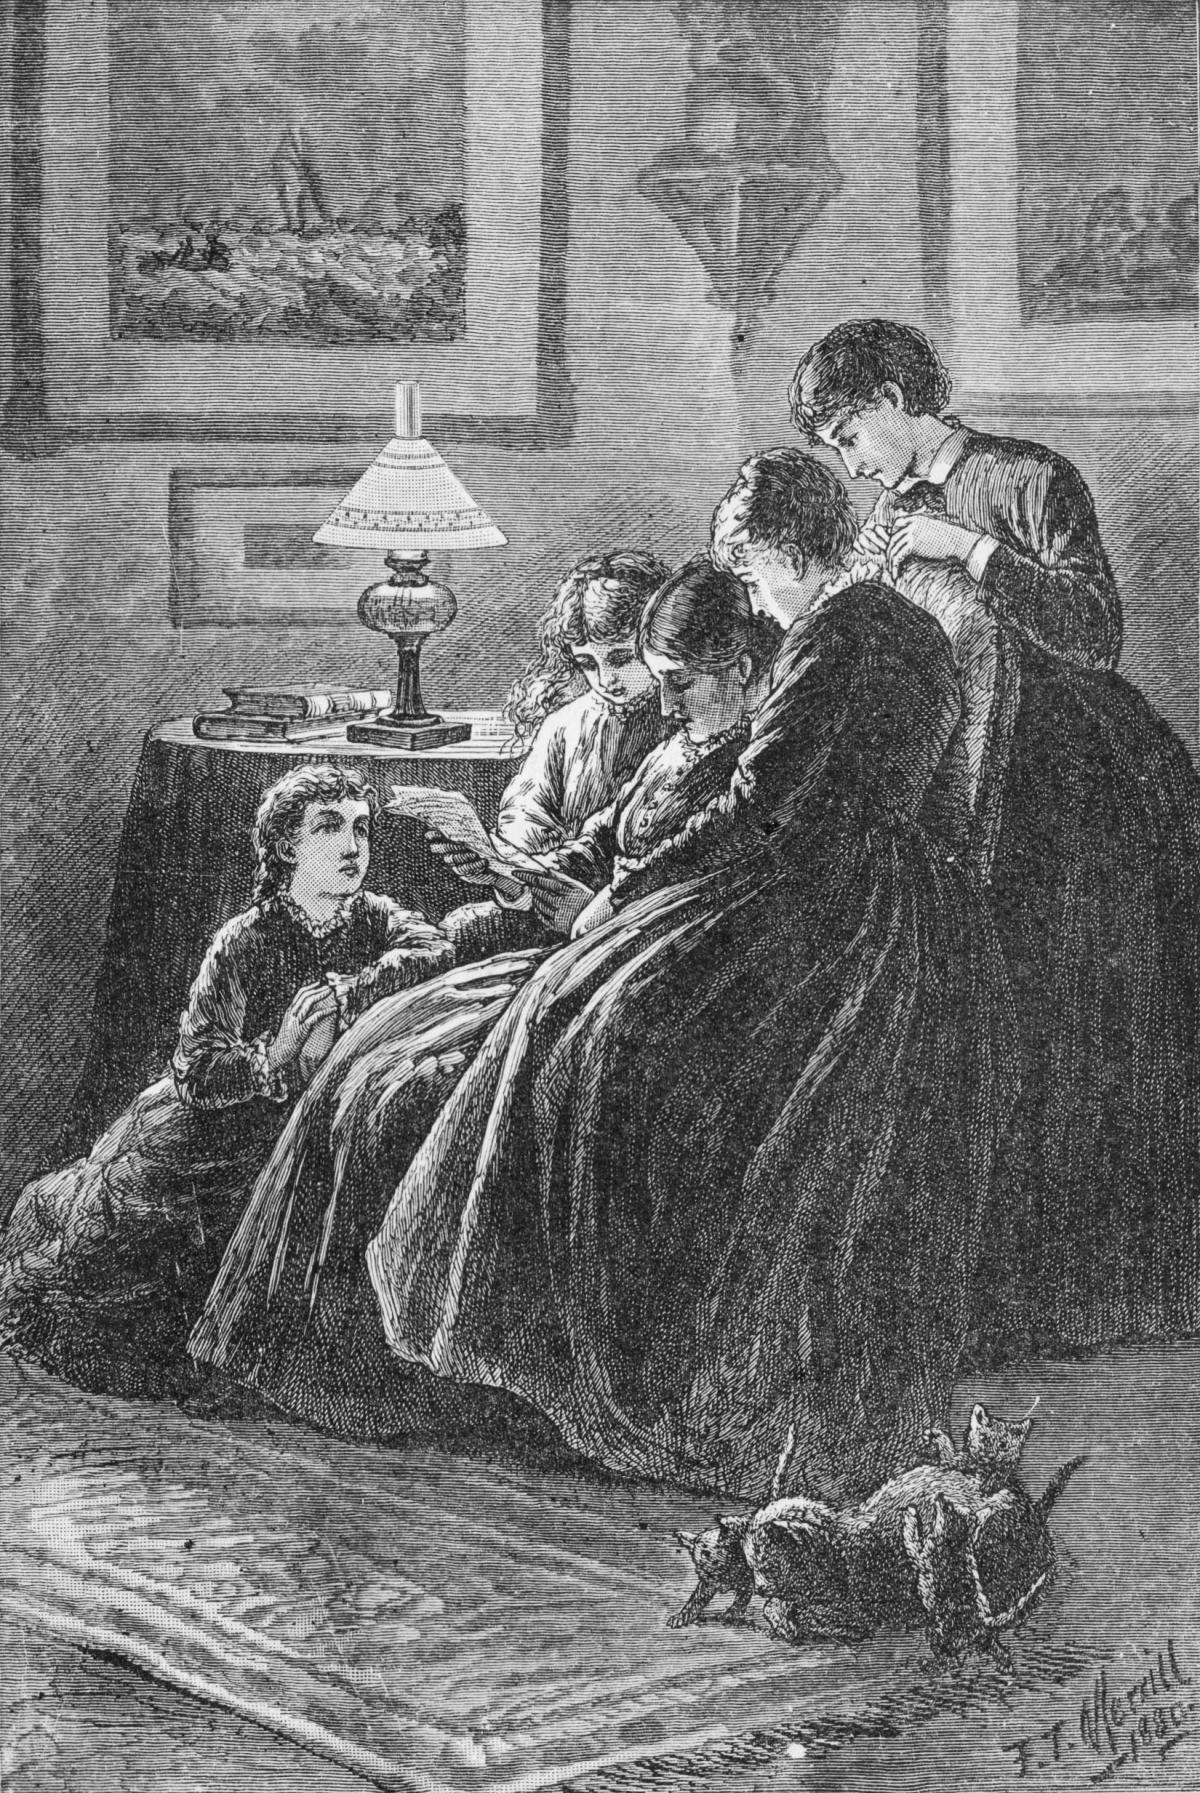 The four girls crowd around Marmee, who is reading a piece of paper and sitting in a chair, in a room lit by a small triangular table lamp